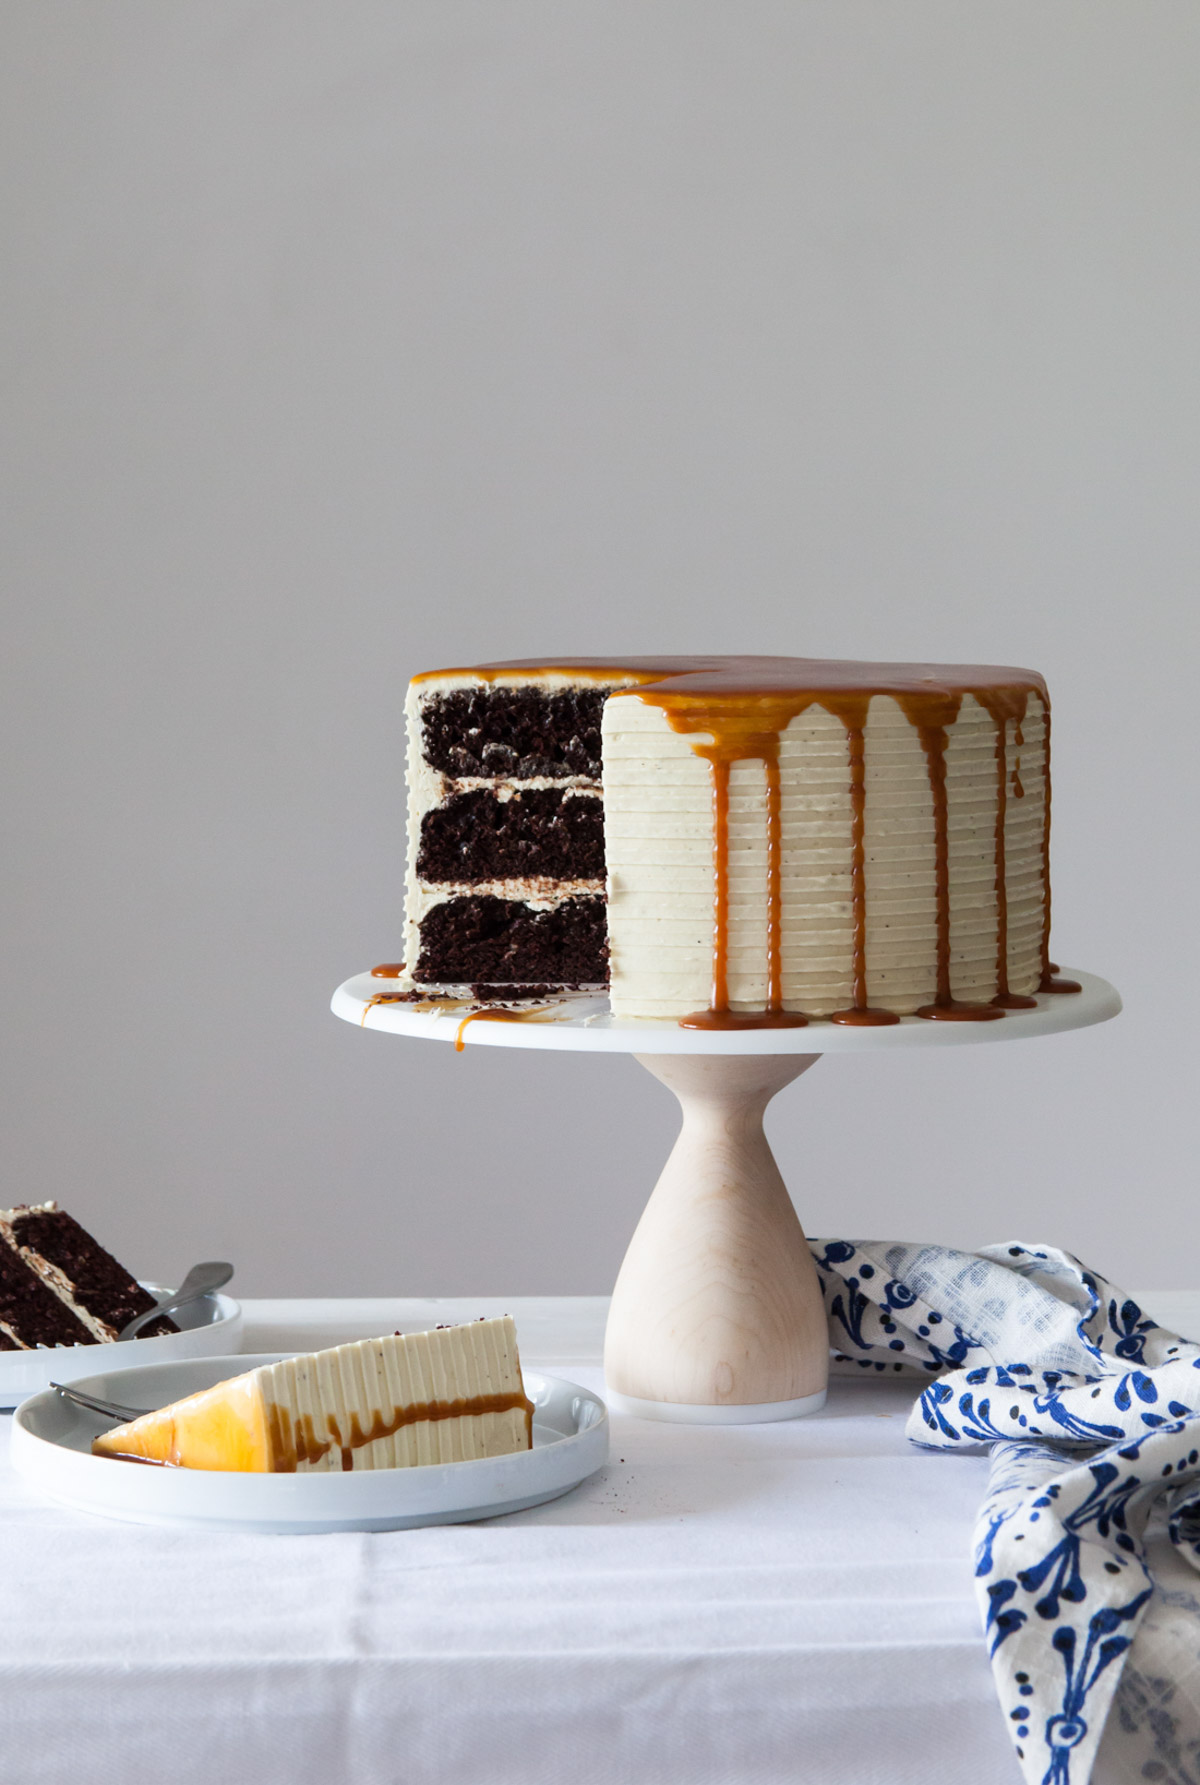 A three layer chocolate cake with earl grey buttercream and caramel sauce